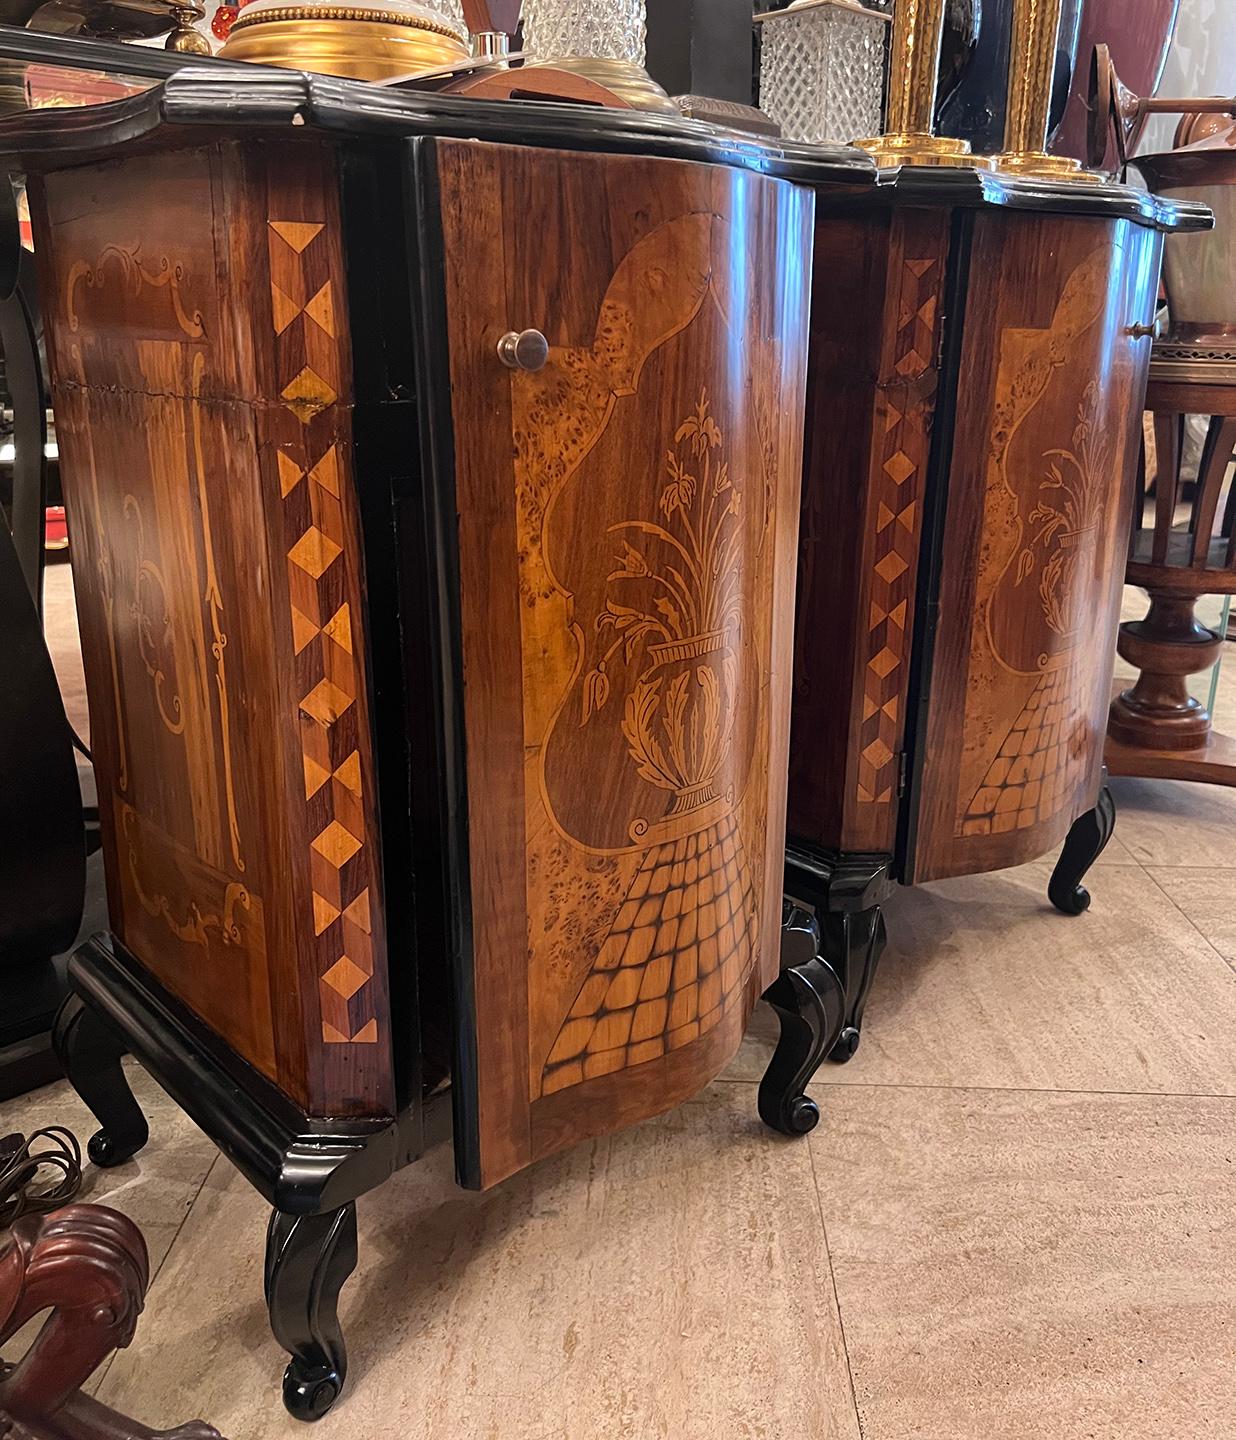 Pair of circa 1900 Italian marquetry nightstands.

Measurements:
Height 29.5